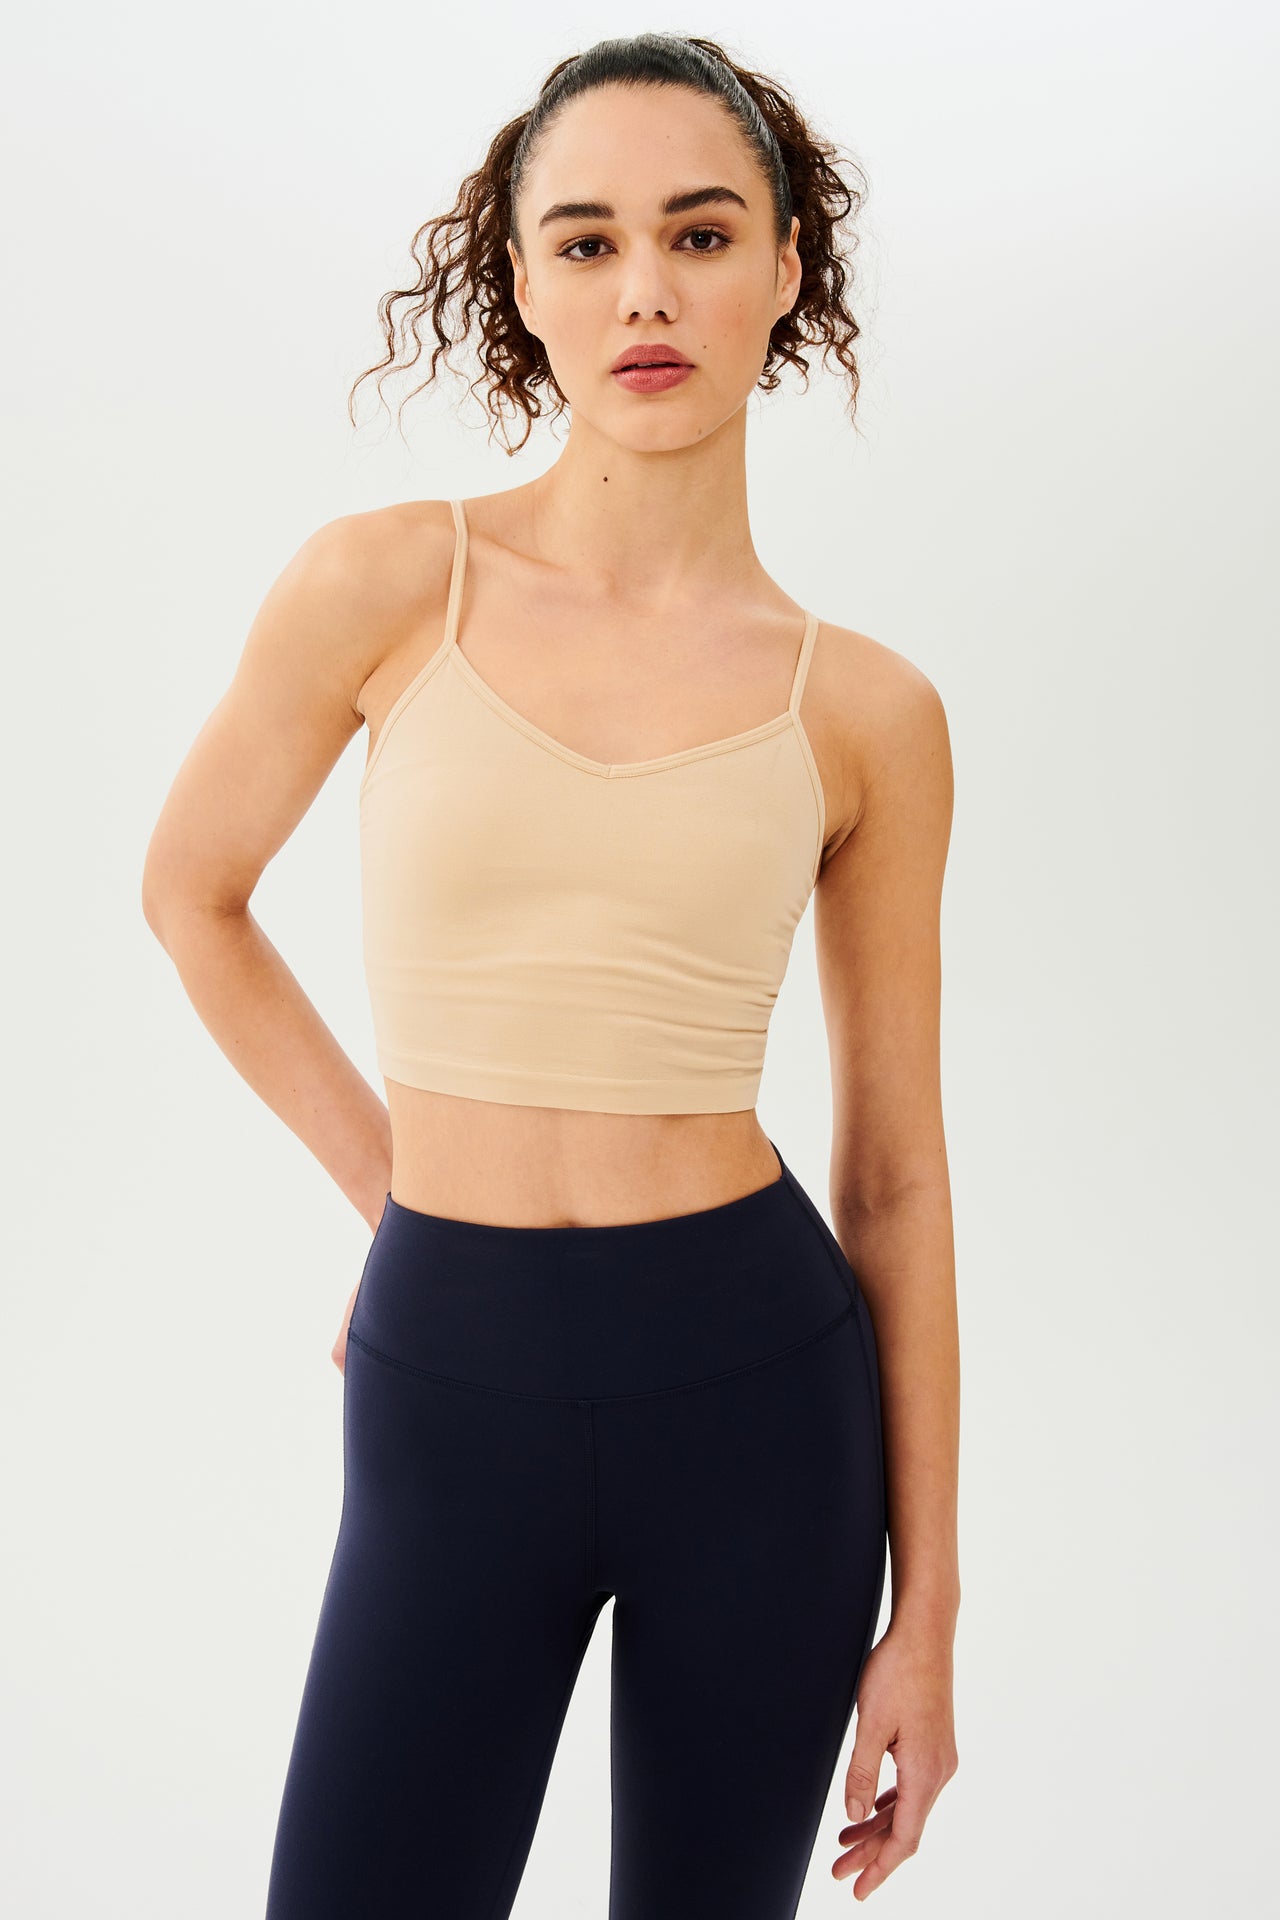 The model is wearing a Loren Seamless Cami - Nude by Splits59 with a built-in shelf bra and black leggings made from chafe-free fabric.